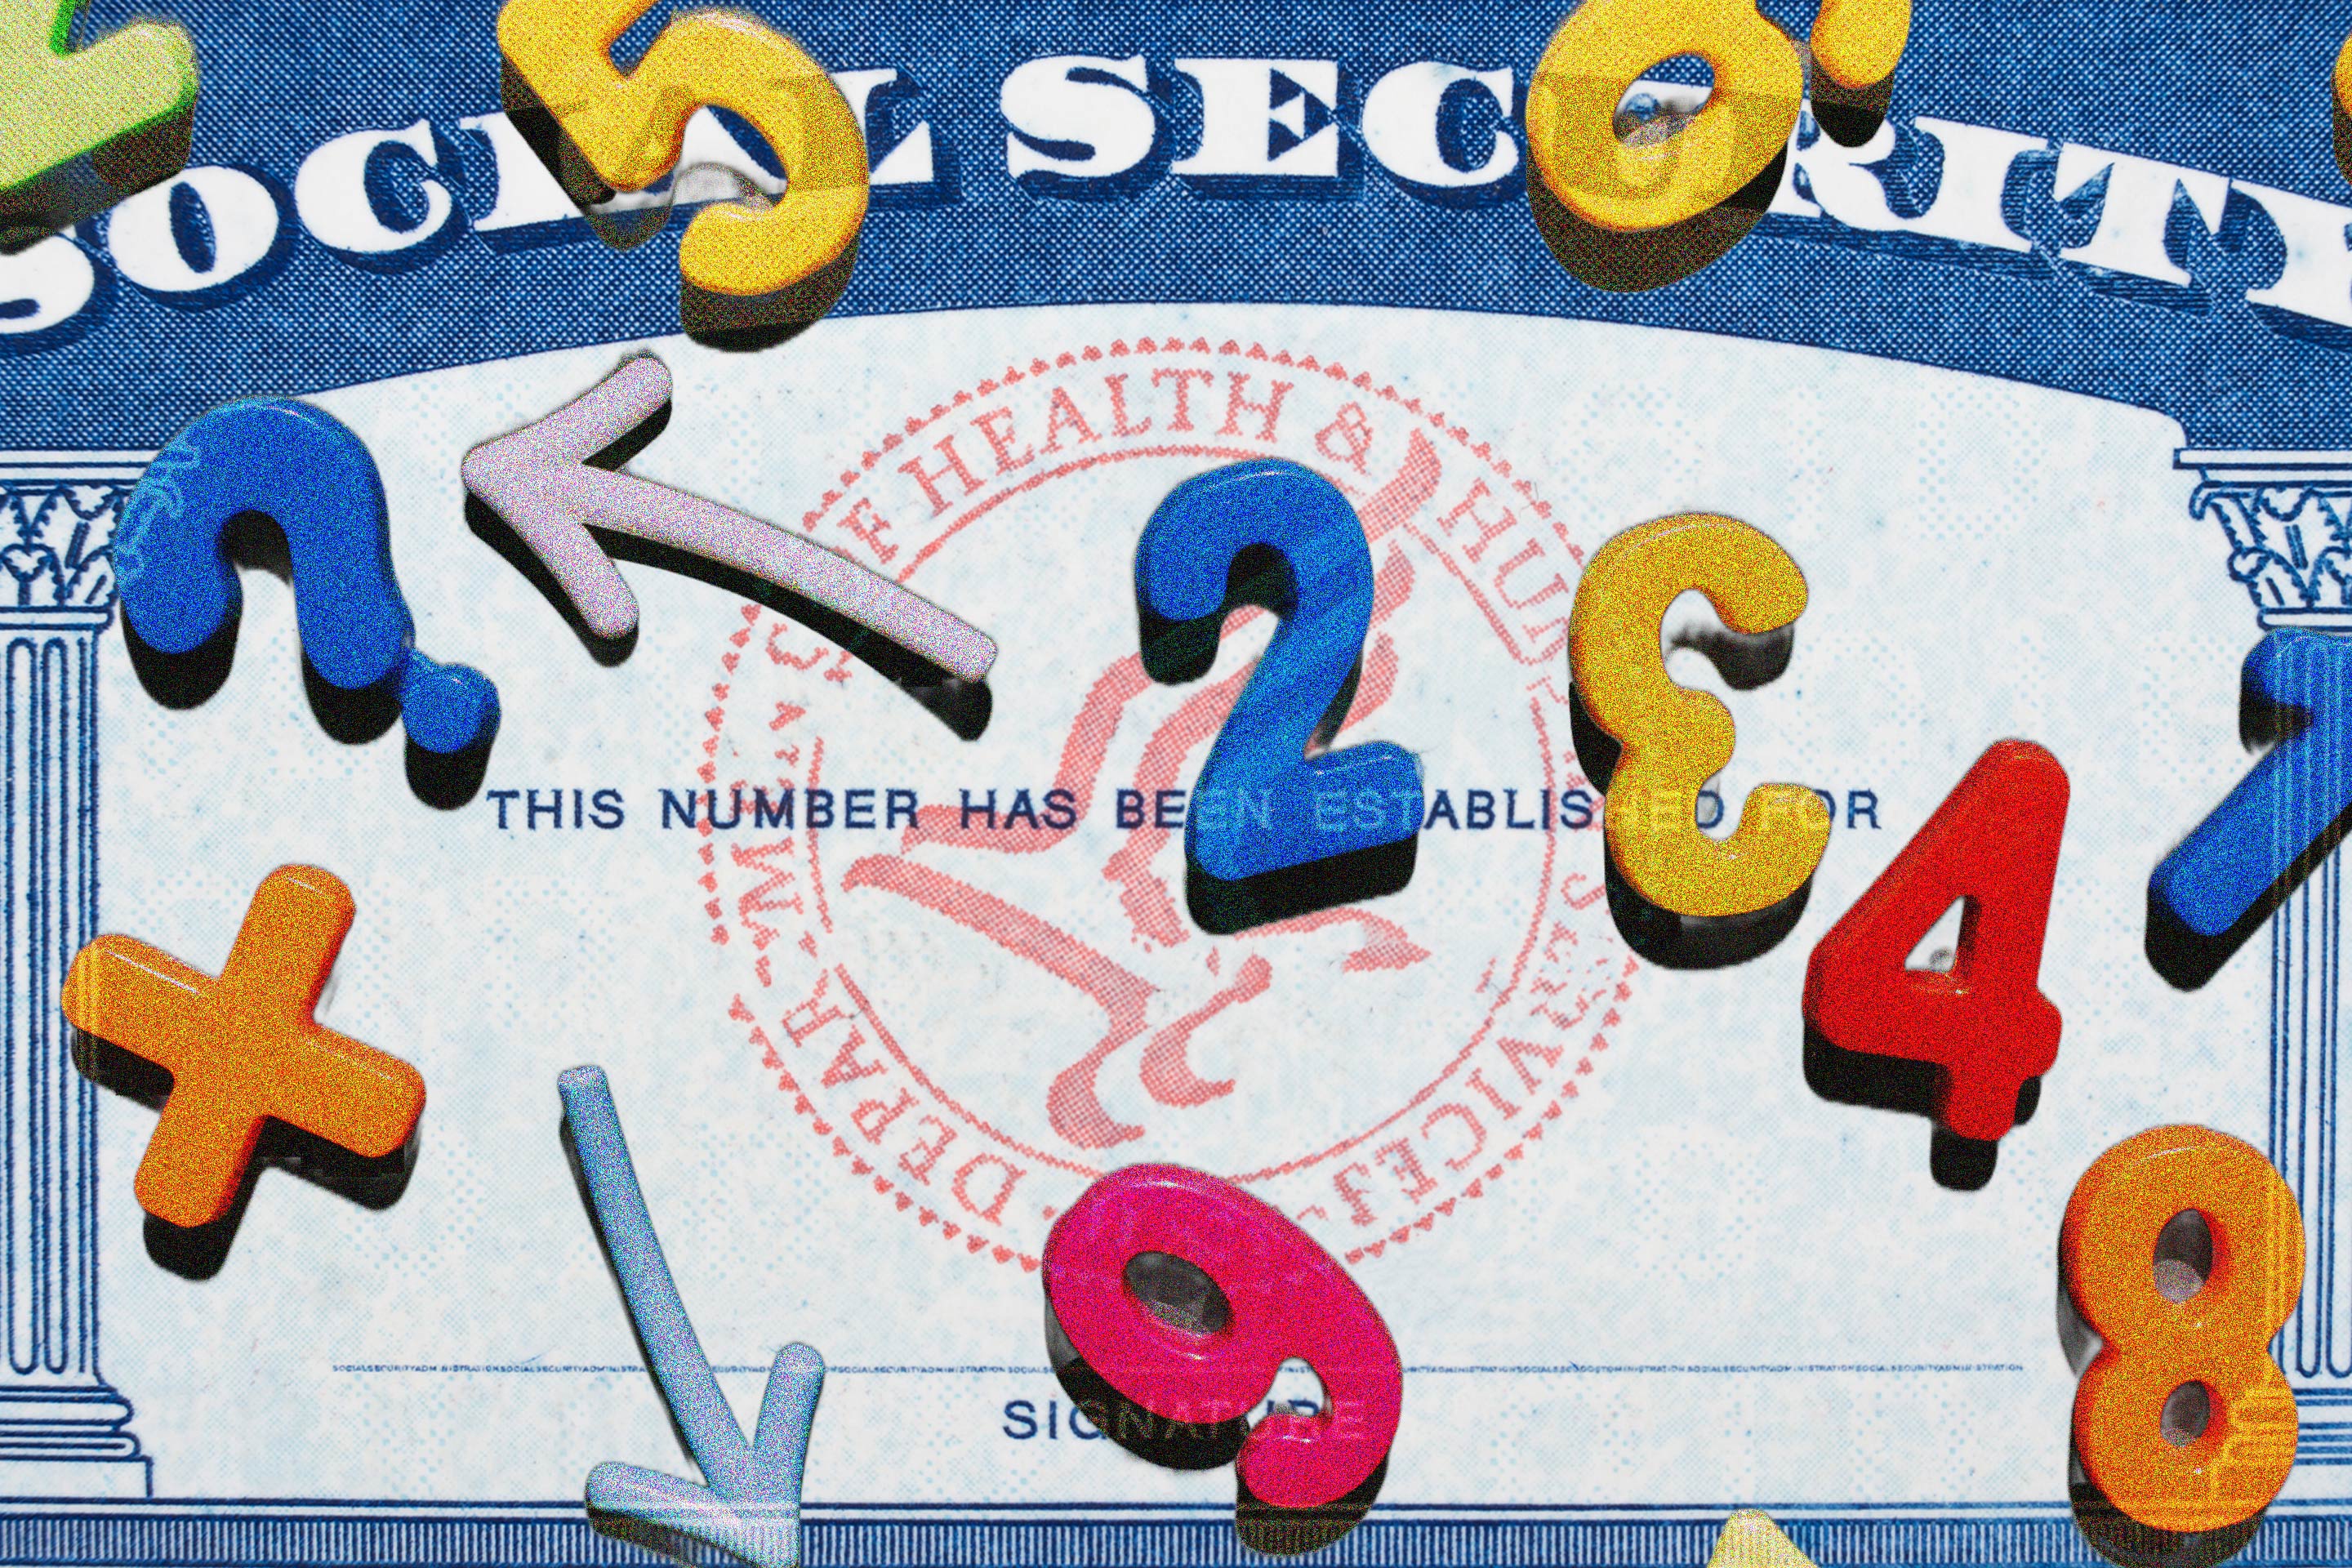 Social Security and the 2024 COLA: Everything You Need to Know